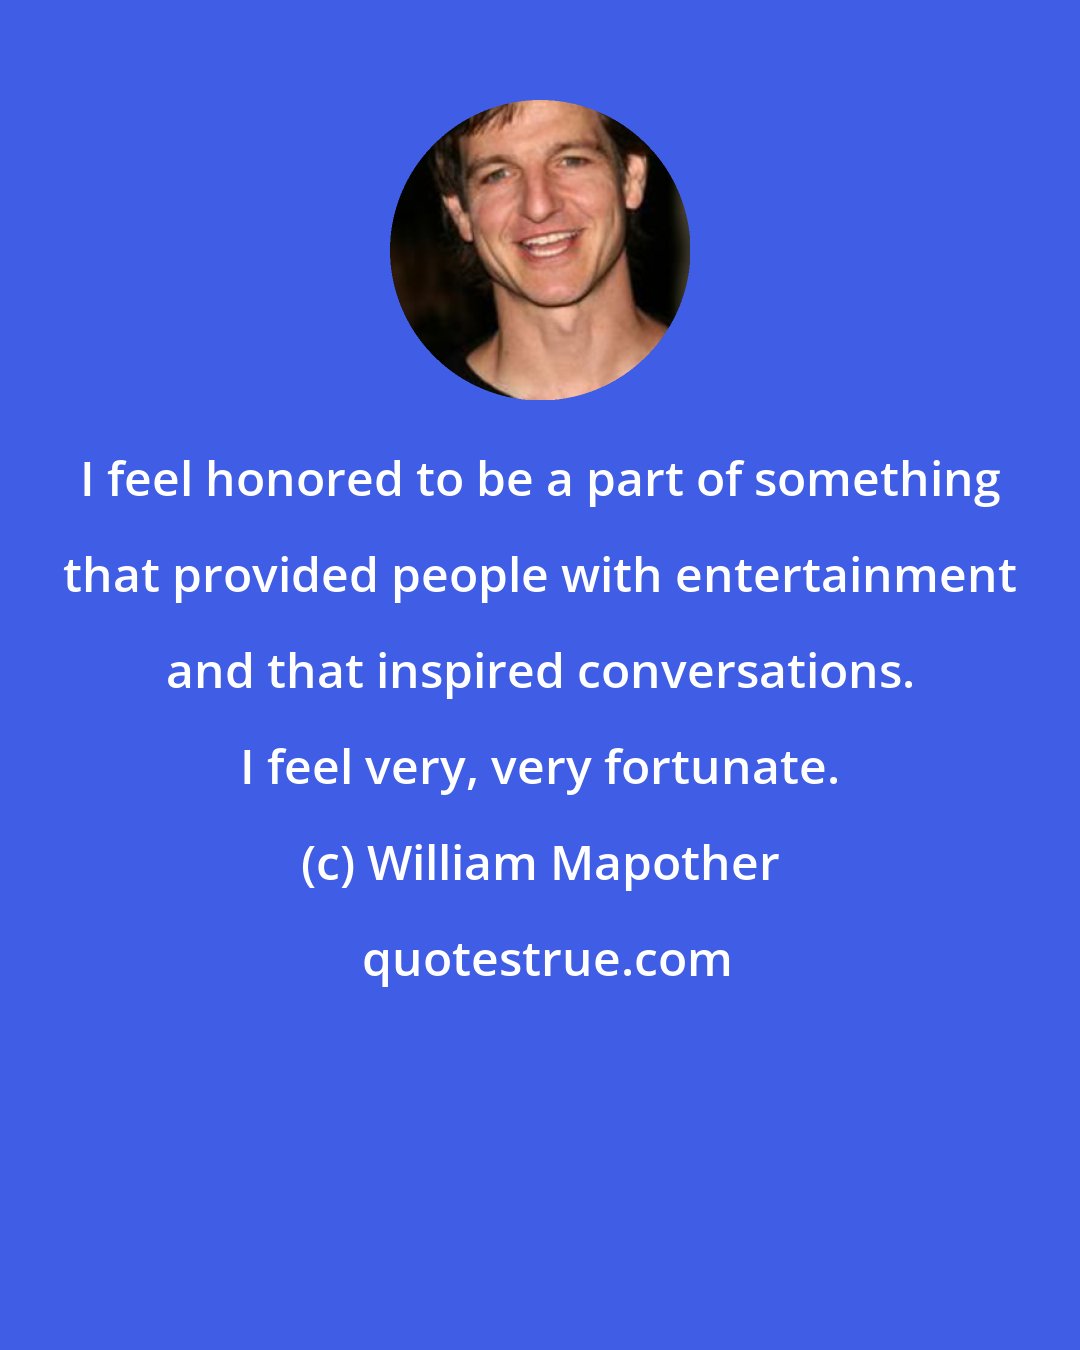 William Mapother: I feel honored to be a part of something that provided people with entertainment and that inspired conversations. I feel very, very fortunate.